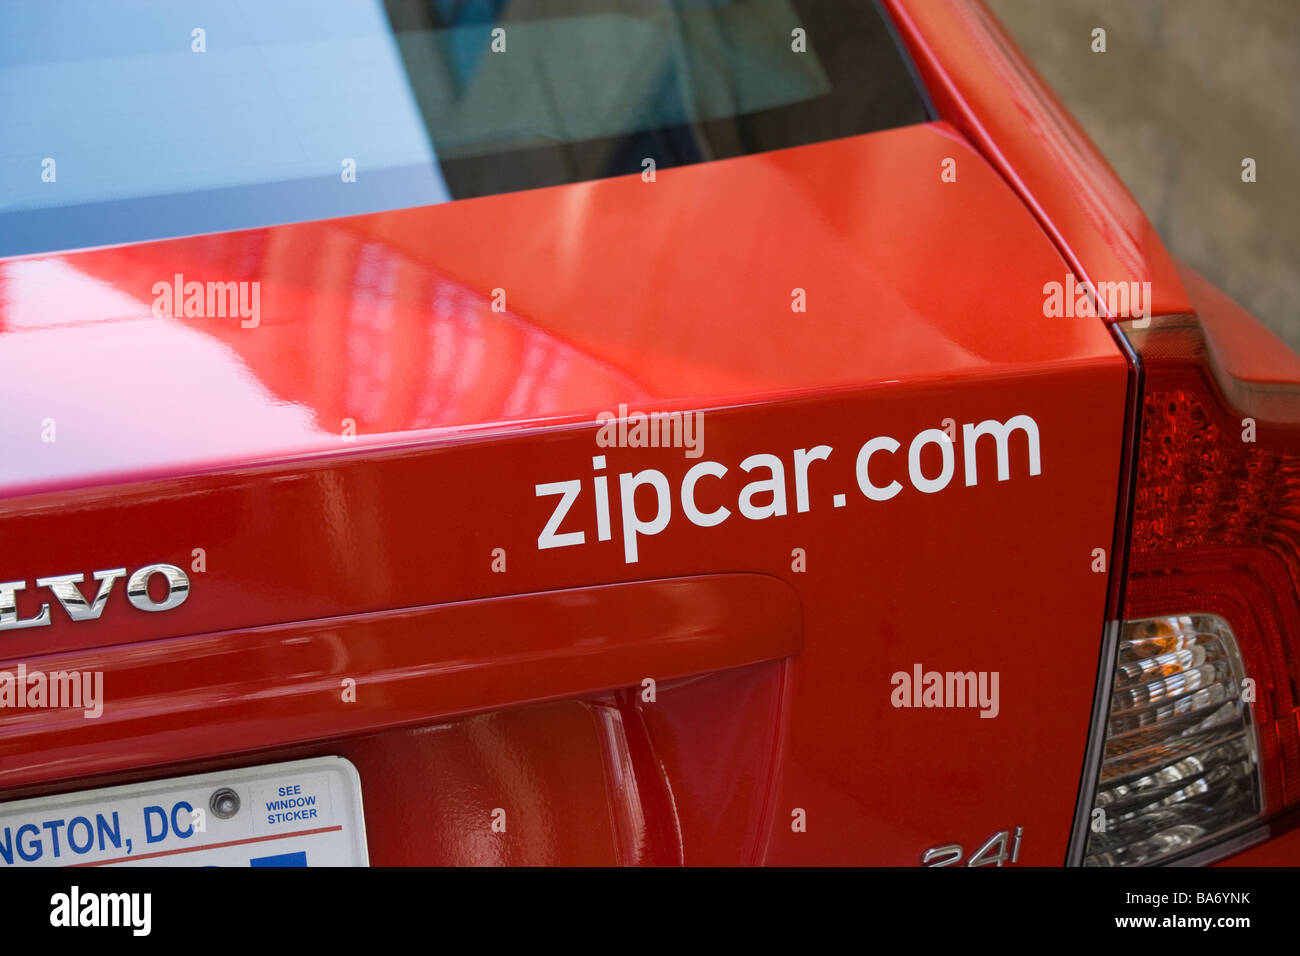 The Zipcar.com internet domain name on the trunk, boot of a red Volvo car in Washington DC, US Stock Photo